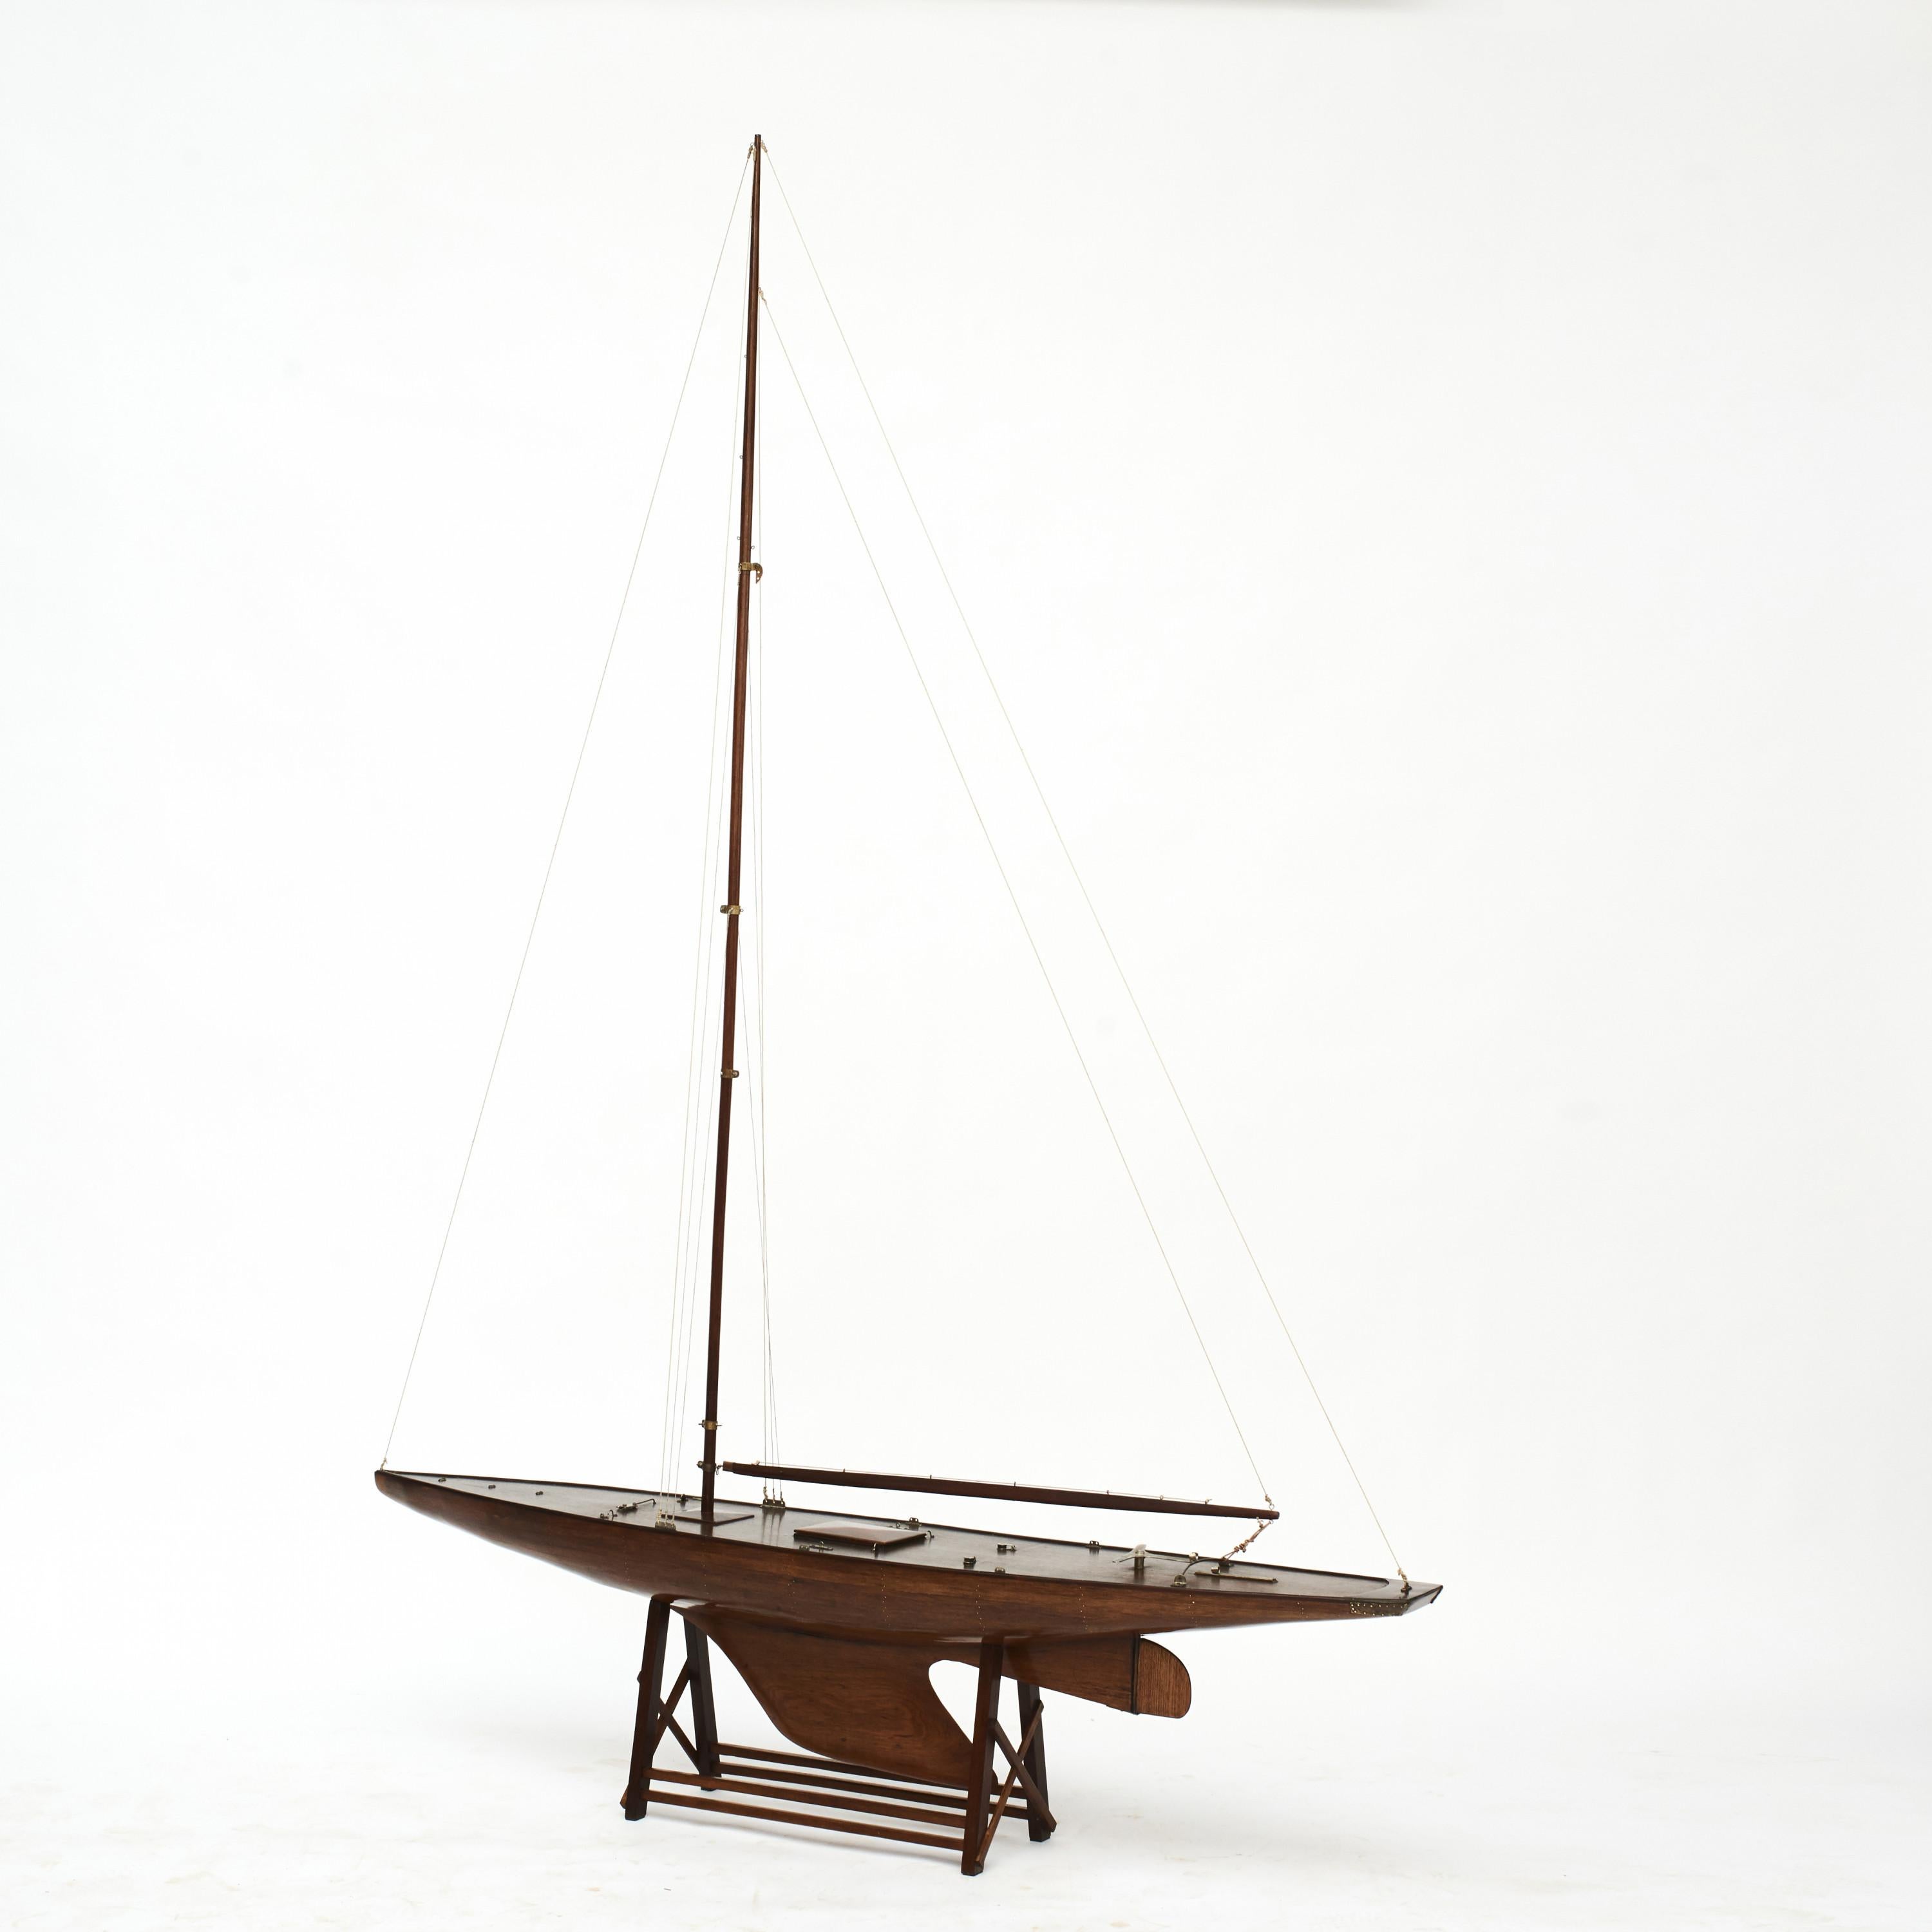 A very elegant wooden pond yacht ship model. High quality, hand-built.
Hull and mast made in rosewood with fine details.
Set onto a custom wood stand to hold the ship upright and stabile.
Denmark 1930-1950.

Height ex base 227 cm.